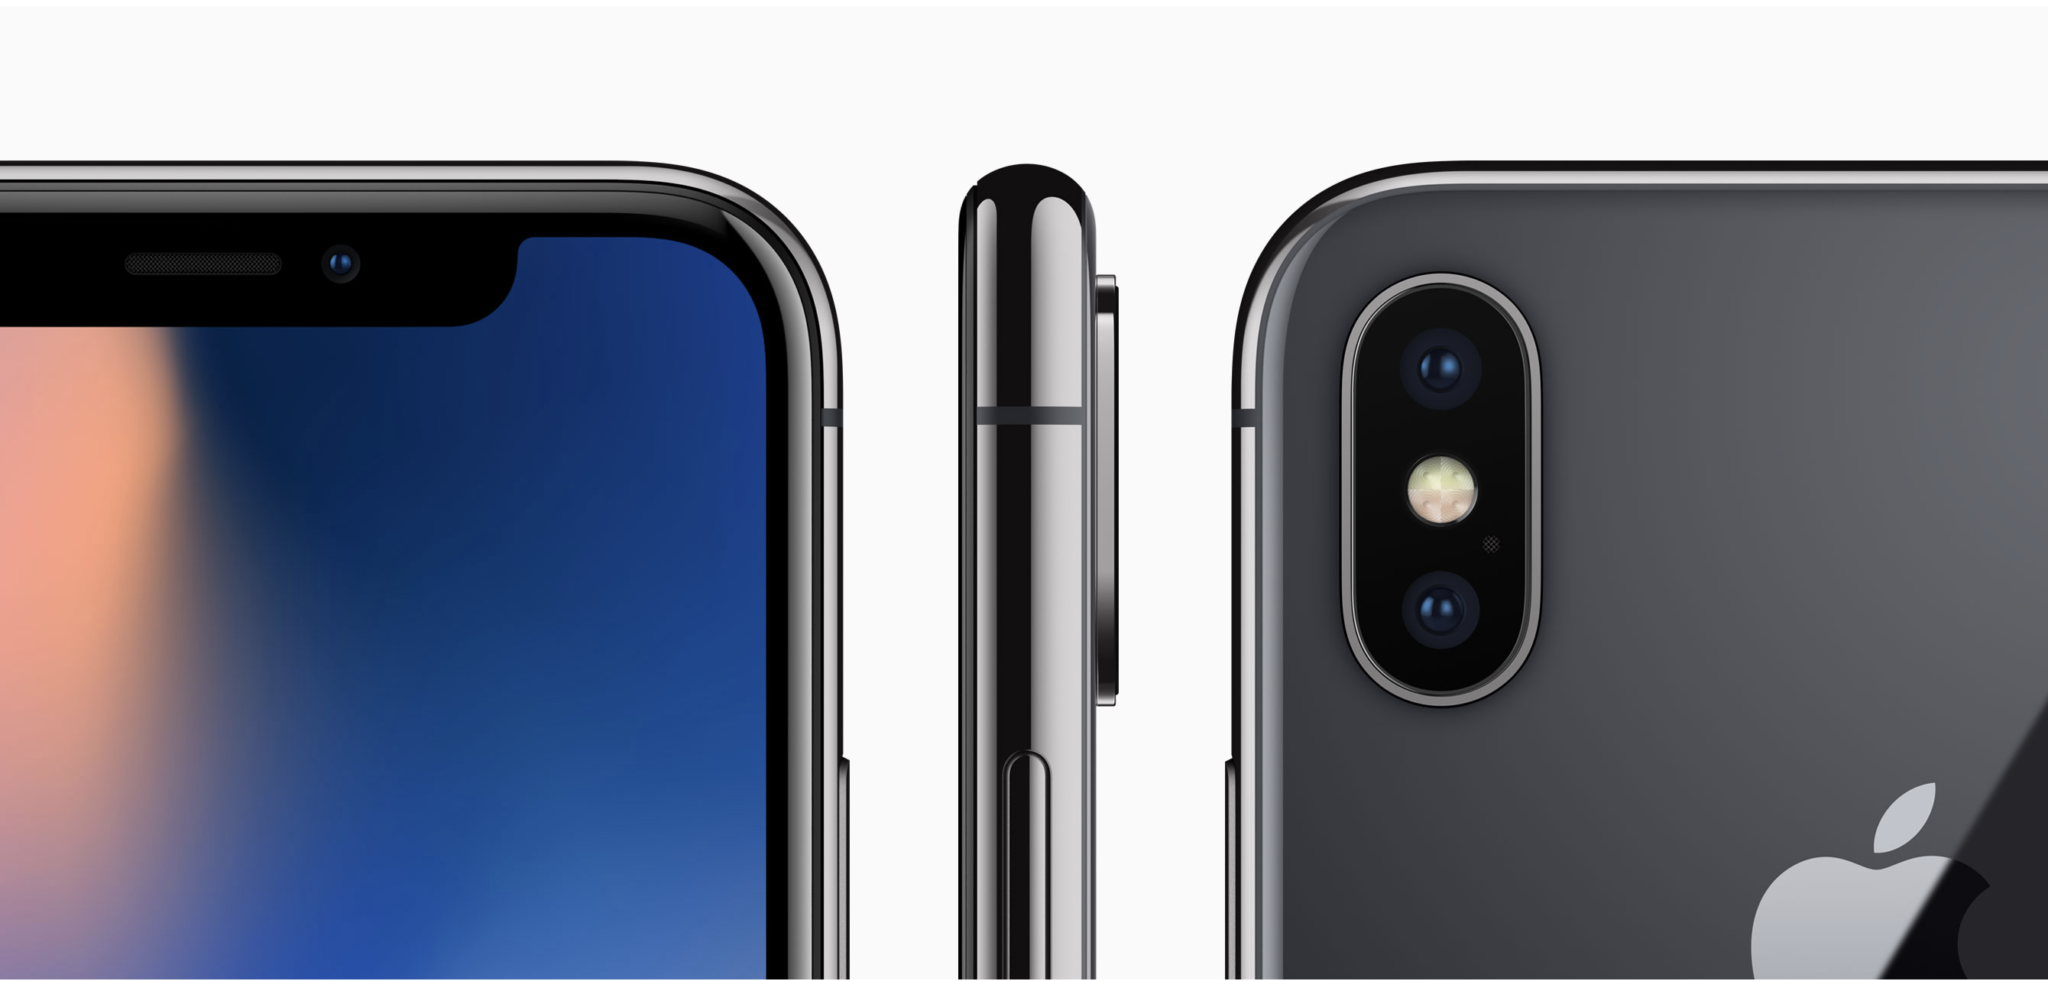 Apple's New iPhone X is in Your Face | Dice.com Career Advice